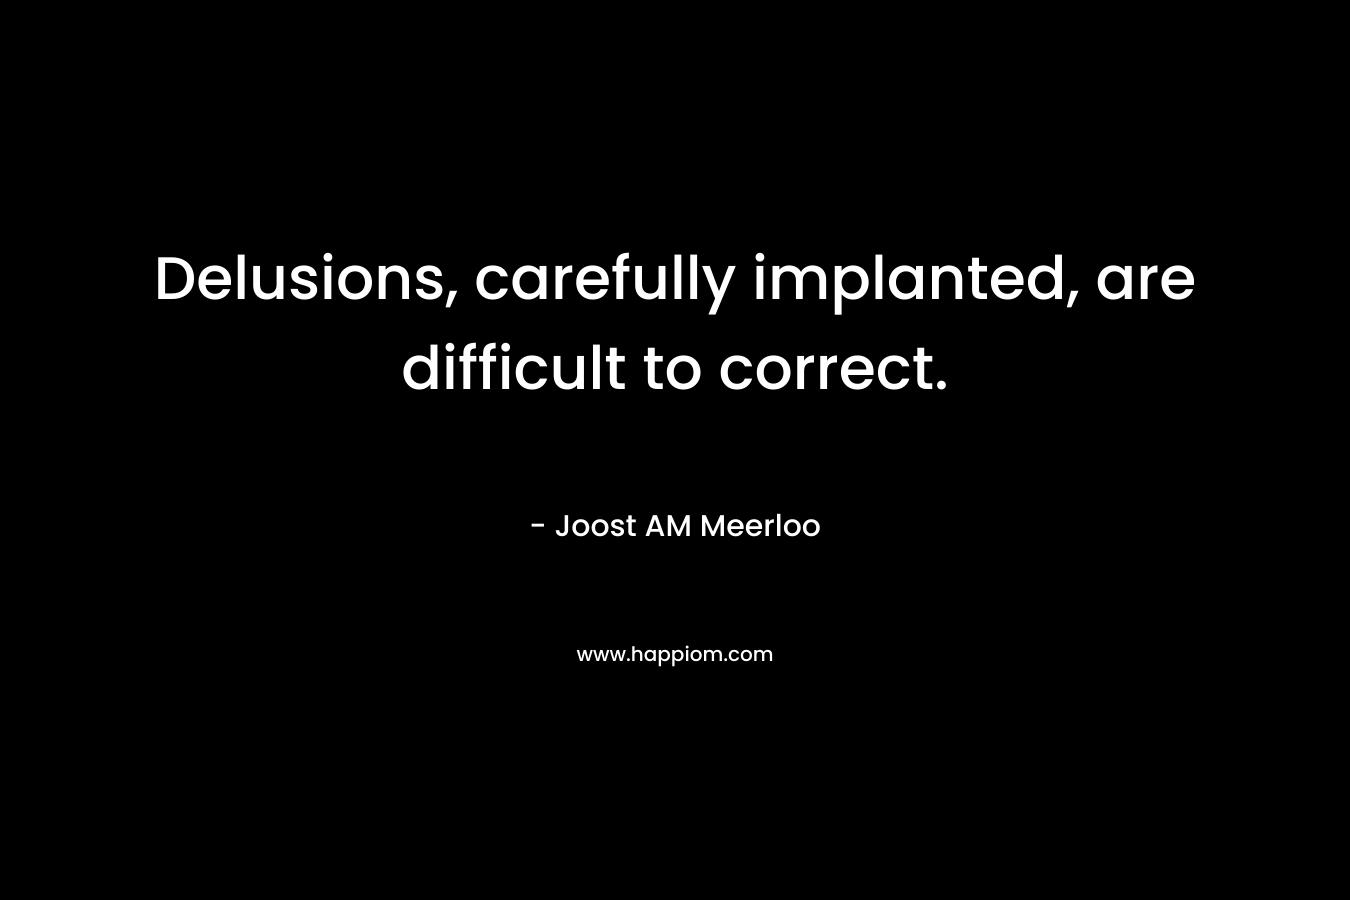 Delusions, carefully implanted, are difficult to correct.